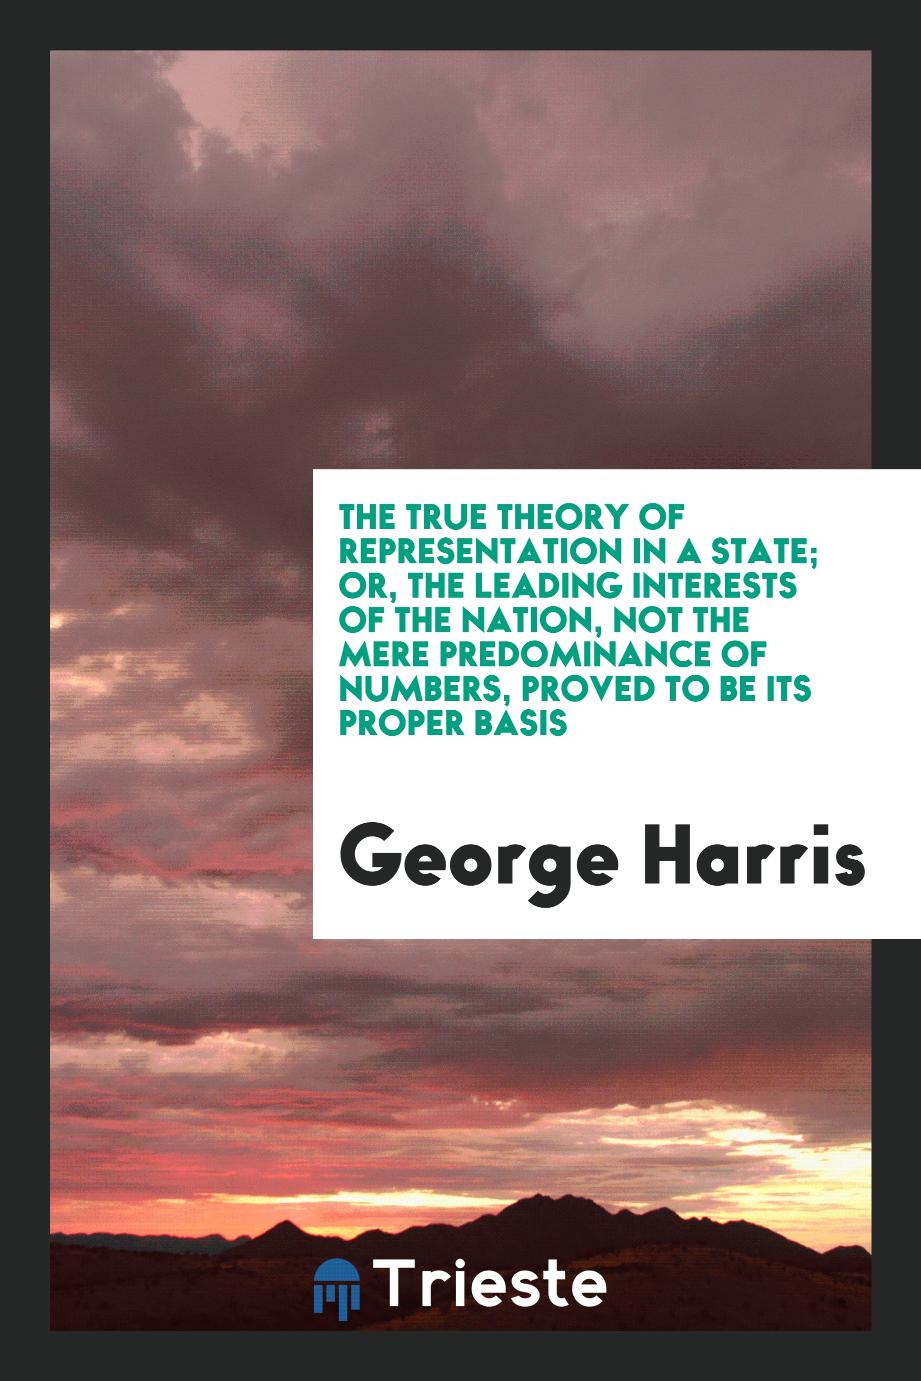 The True Theory of Representation in a State; Or, the Leading Interests of the Nation, Not the Mere Predominance of Numbers, Proved to Be Its Proper Basis